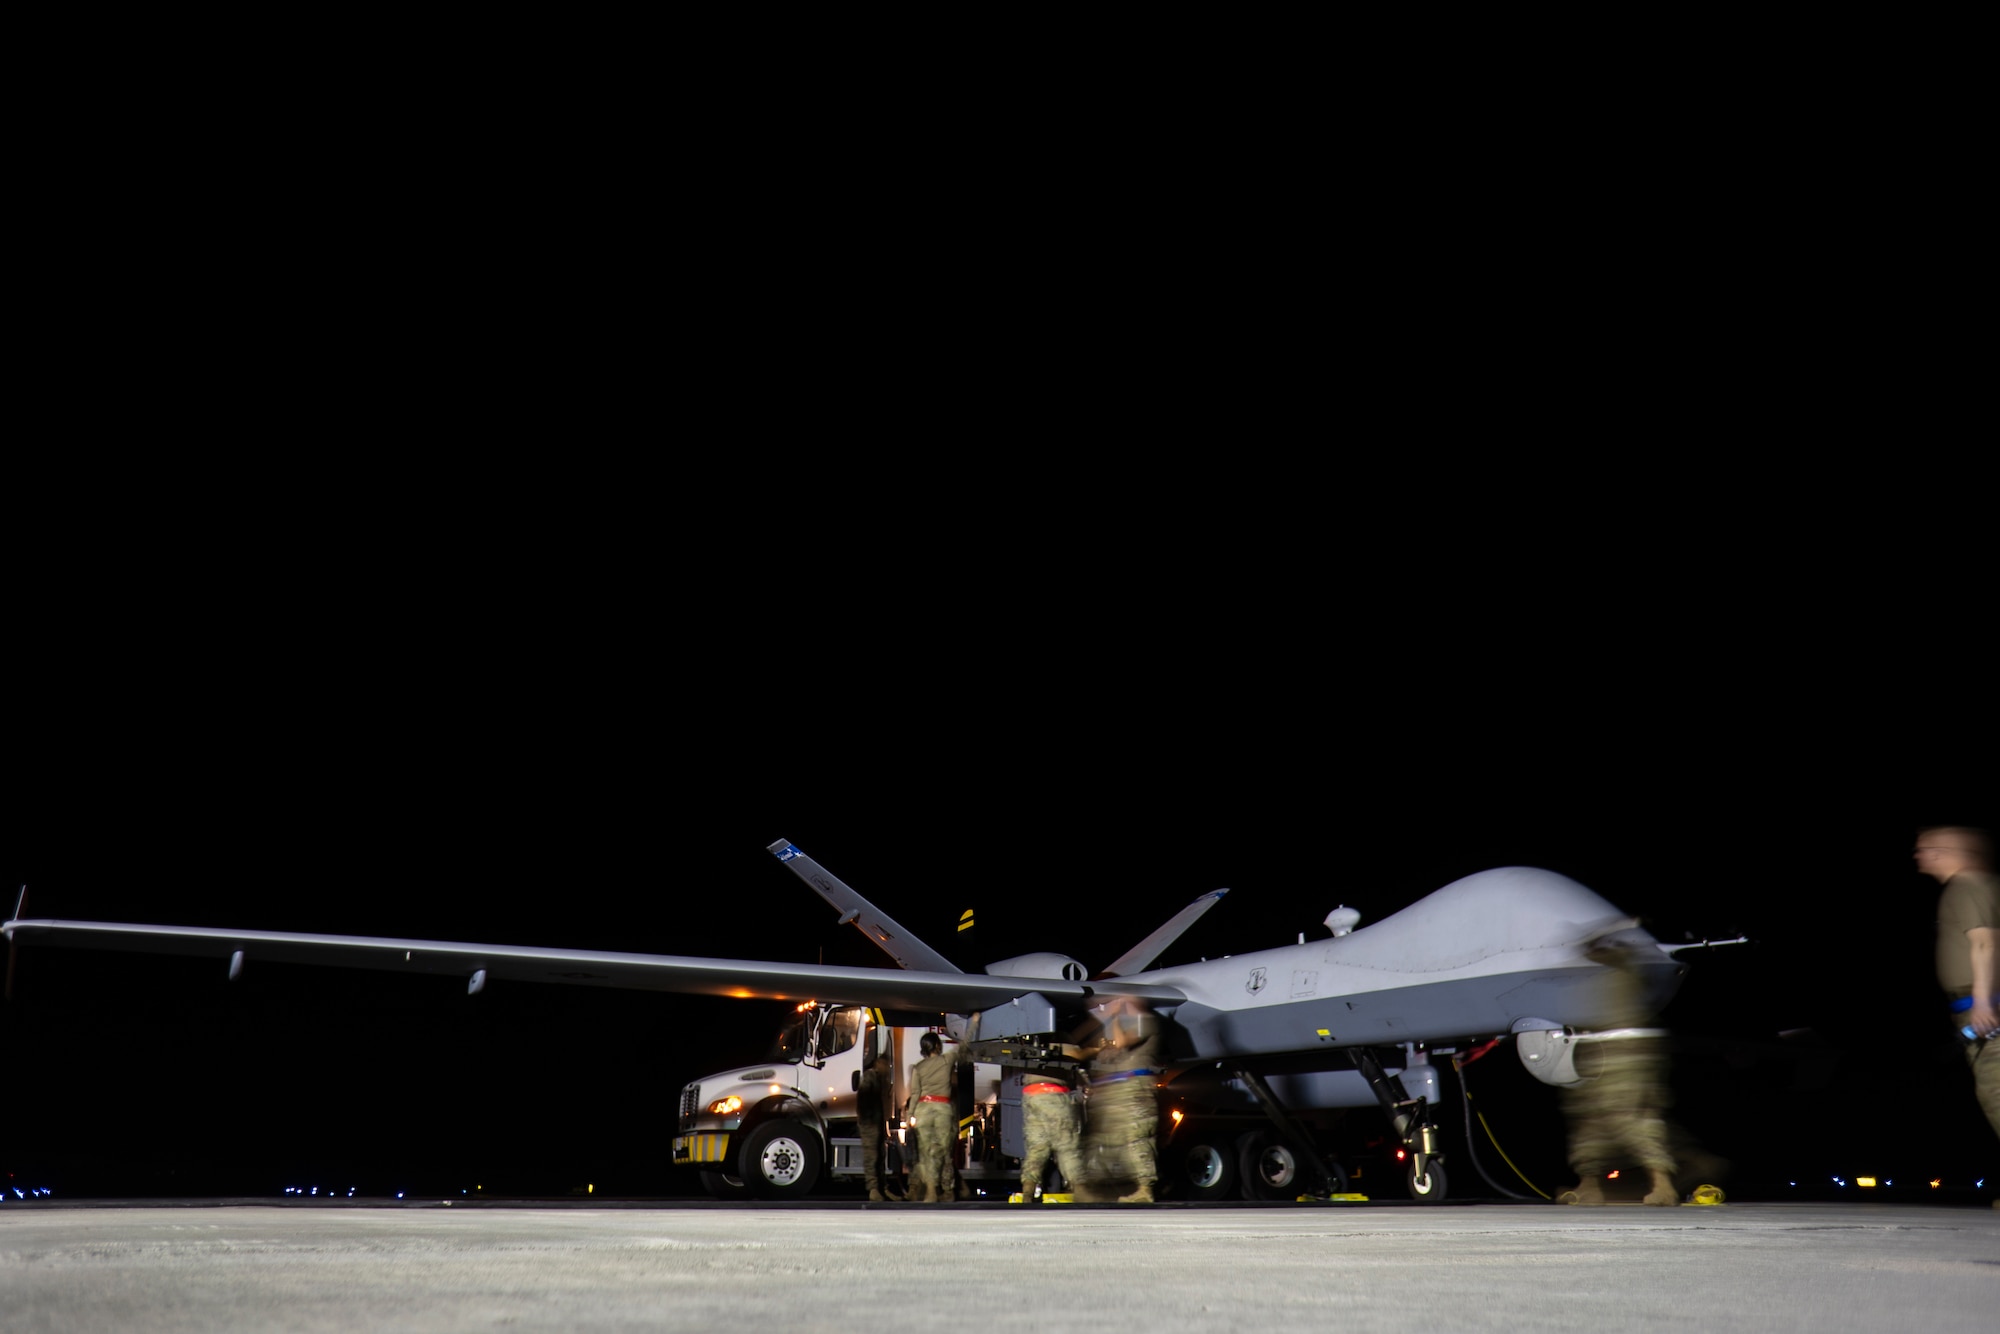 KANEOHE BAY (June 30, 2022) - U.S. Air Force maintenance Airmen from the 163d Attack Wing and 49th Aircraft Maintenance Squadron refuel an MQ-9A Reaper assigned to the 163d Attack Wing, after landing at Marine Corps Air Station Kaneohe Bay, Hawaii, during Rim of the Pacific (RIMPAC) 2022. Twenty-six nations, 38 ships, four submarines, more than 170 aircraft and 25,000 personnel are participating in RIMPAC from June 29 to Aug. 4 in and around the Hawaiian Islands and Southern California. The world’s largest international maritime exercise, RIMPAC provides a unique training opportunity while fostering and sustaining cooperative relationships among participants critical to ensuring the safety of sea lanes and security on the world’s oceans. RIMPAC 2022 is the 28th exercise in the series that began in 1971. (U.S. Air Force photo by Tech. Sgt. Emerson Nuñez)